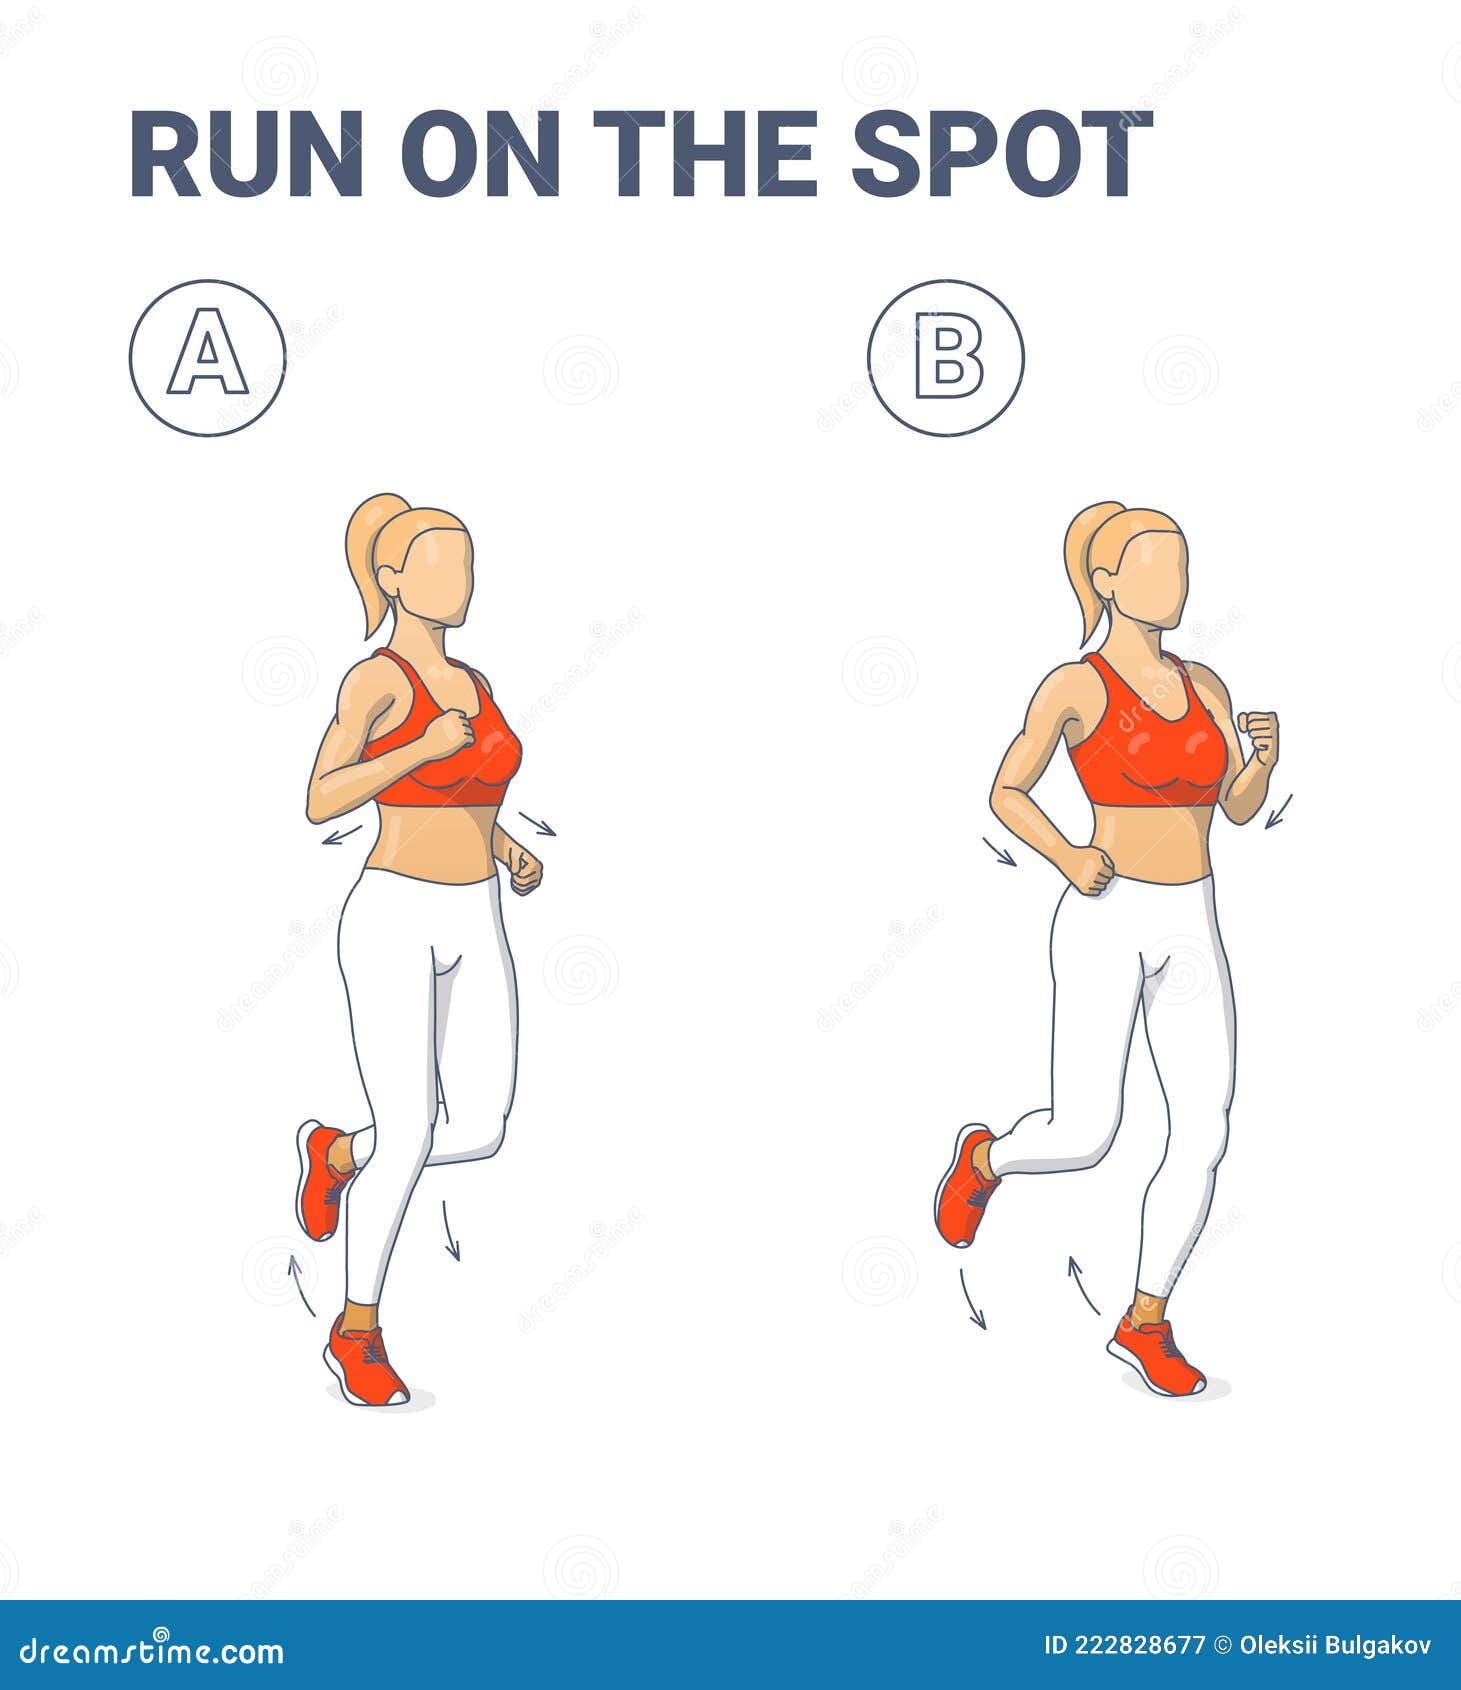 jog in place clipart